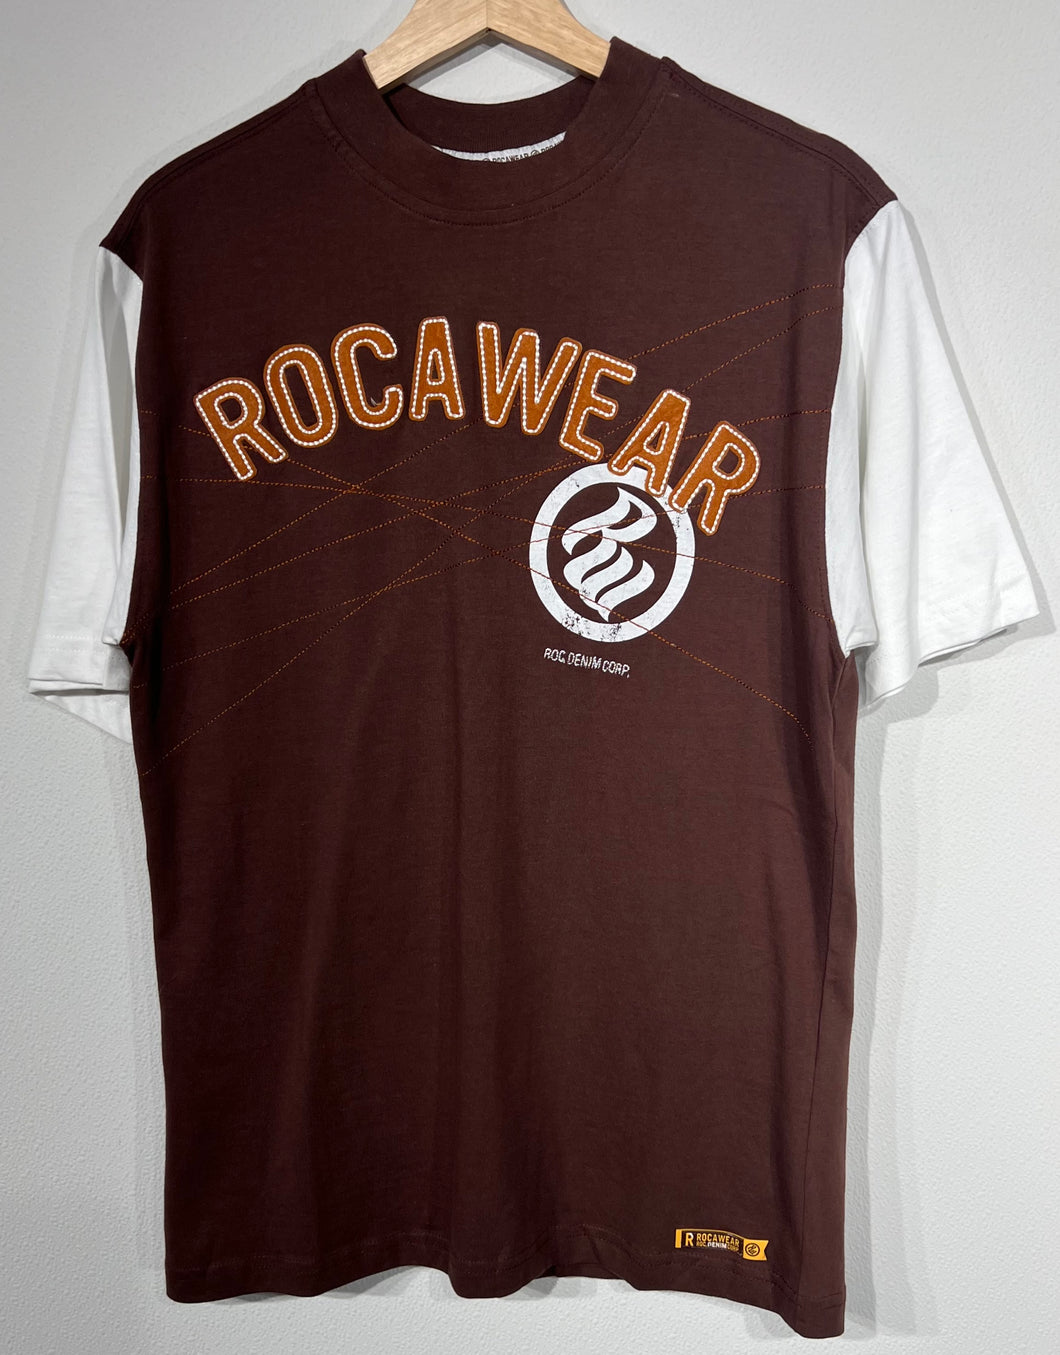 Vintage Rocawear Embroidered Tshirt sz S New w. Tags